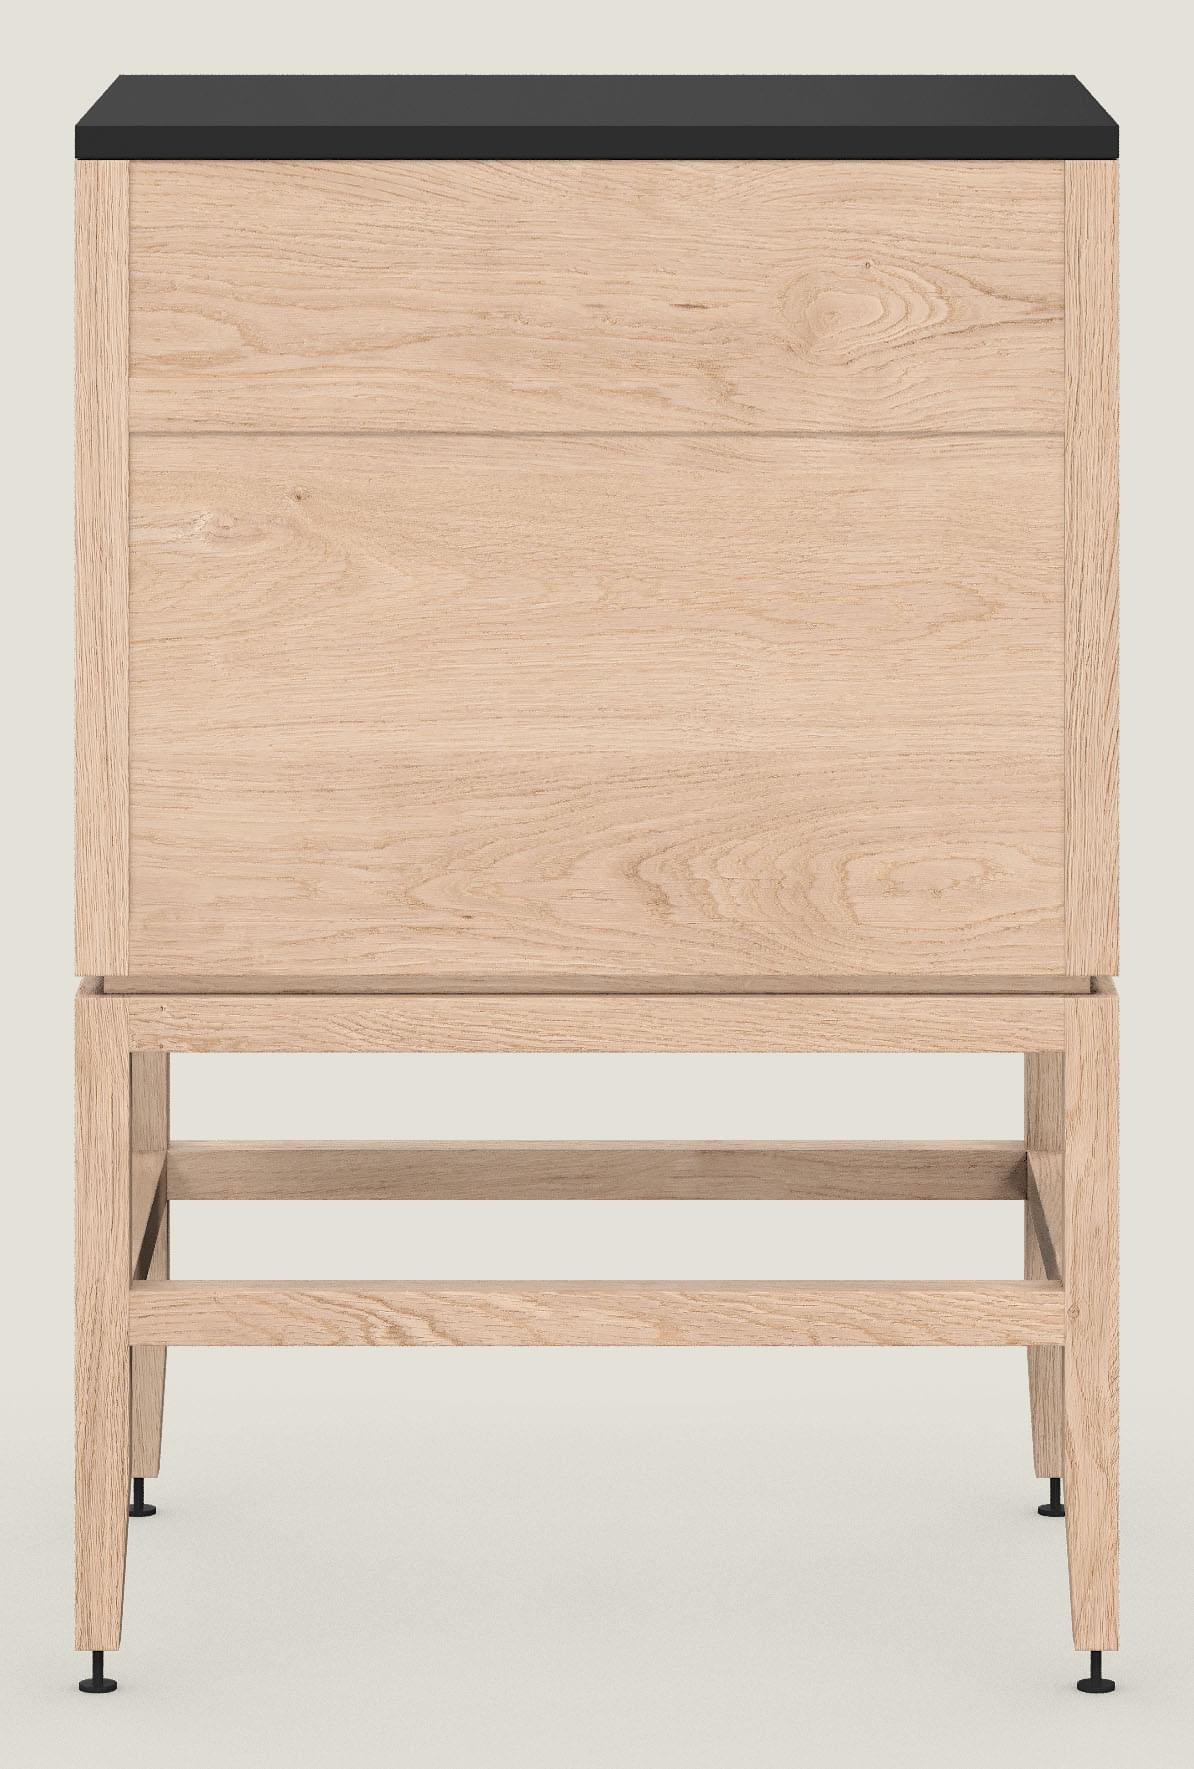 Coquo modular kitchen cabinet with two doors and one drawer in natural oak with metal handles.